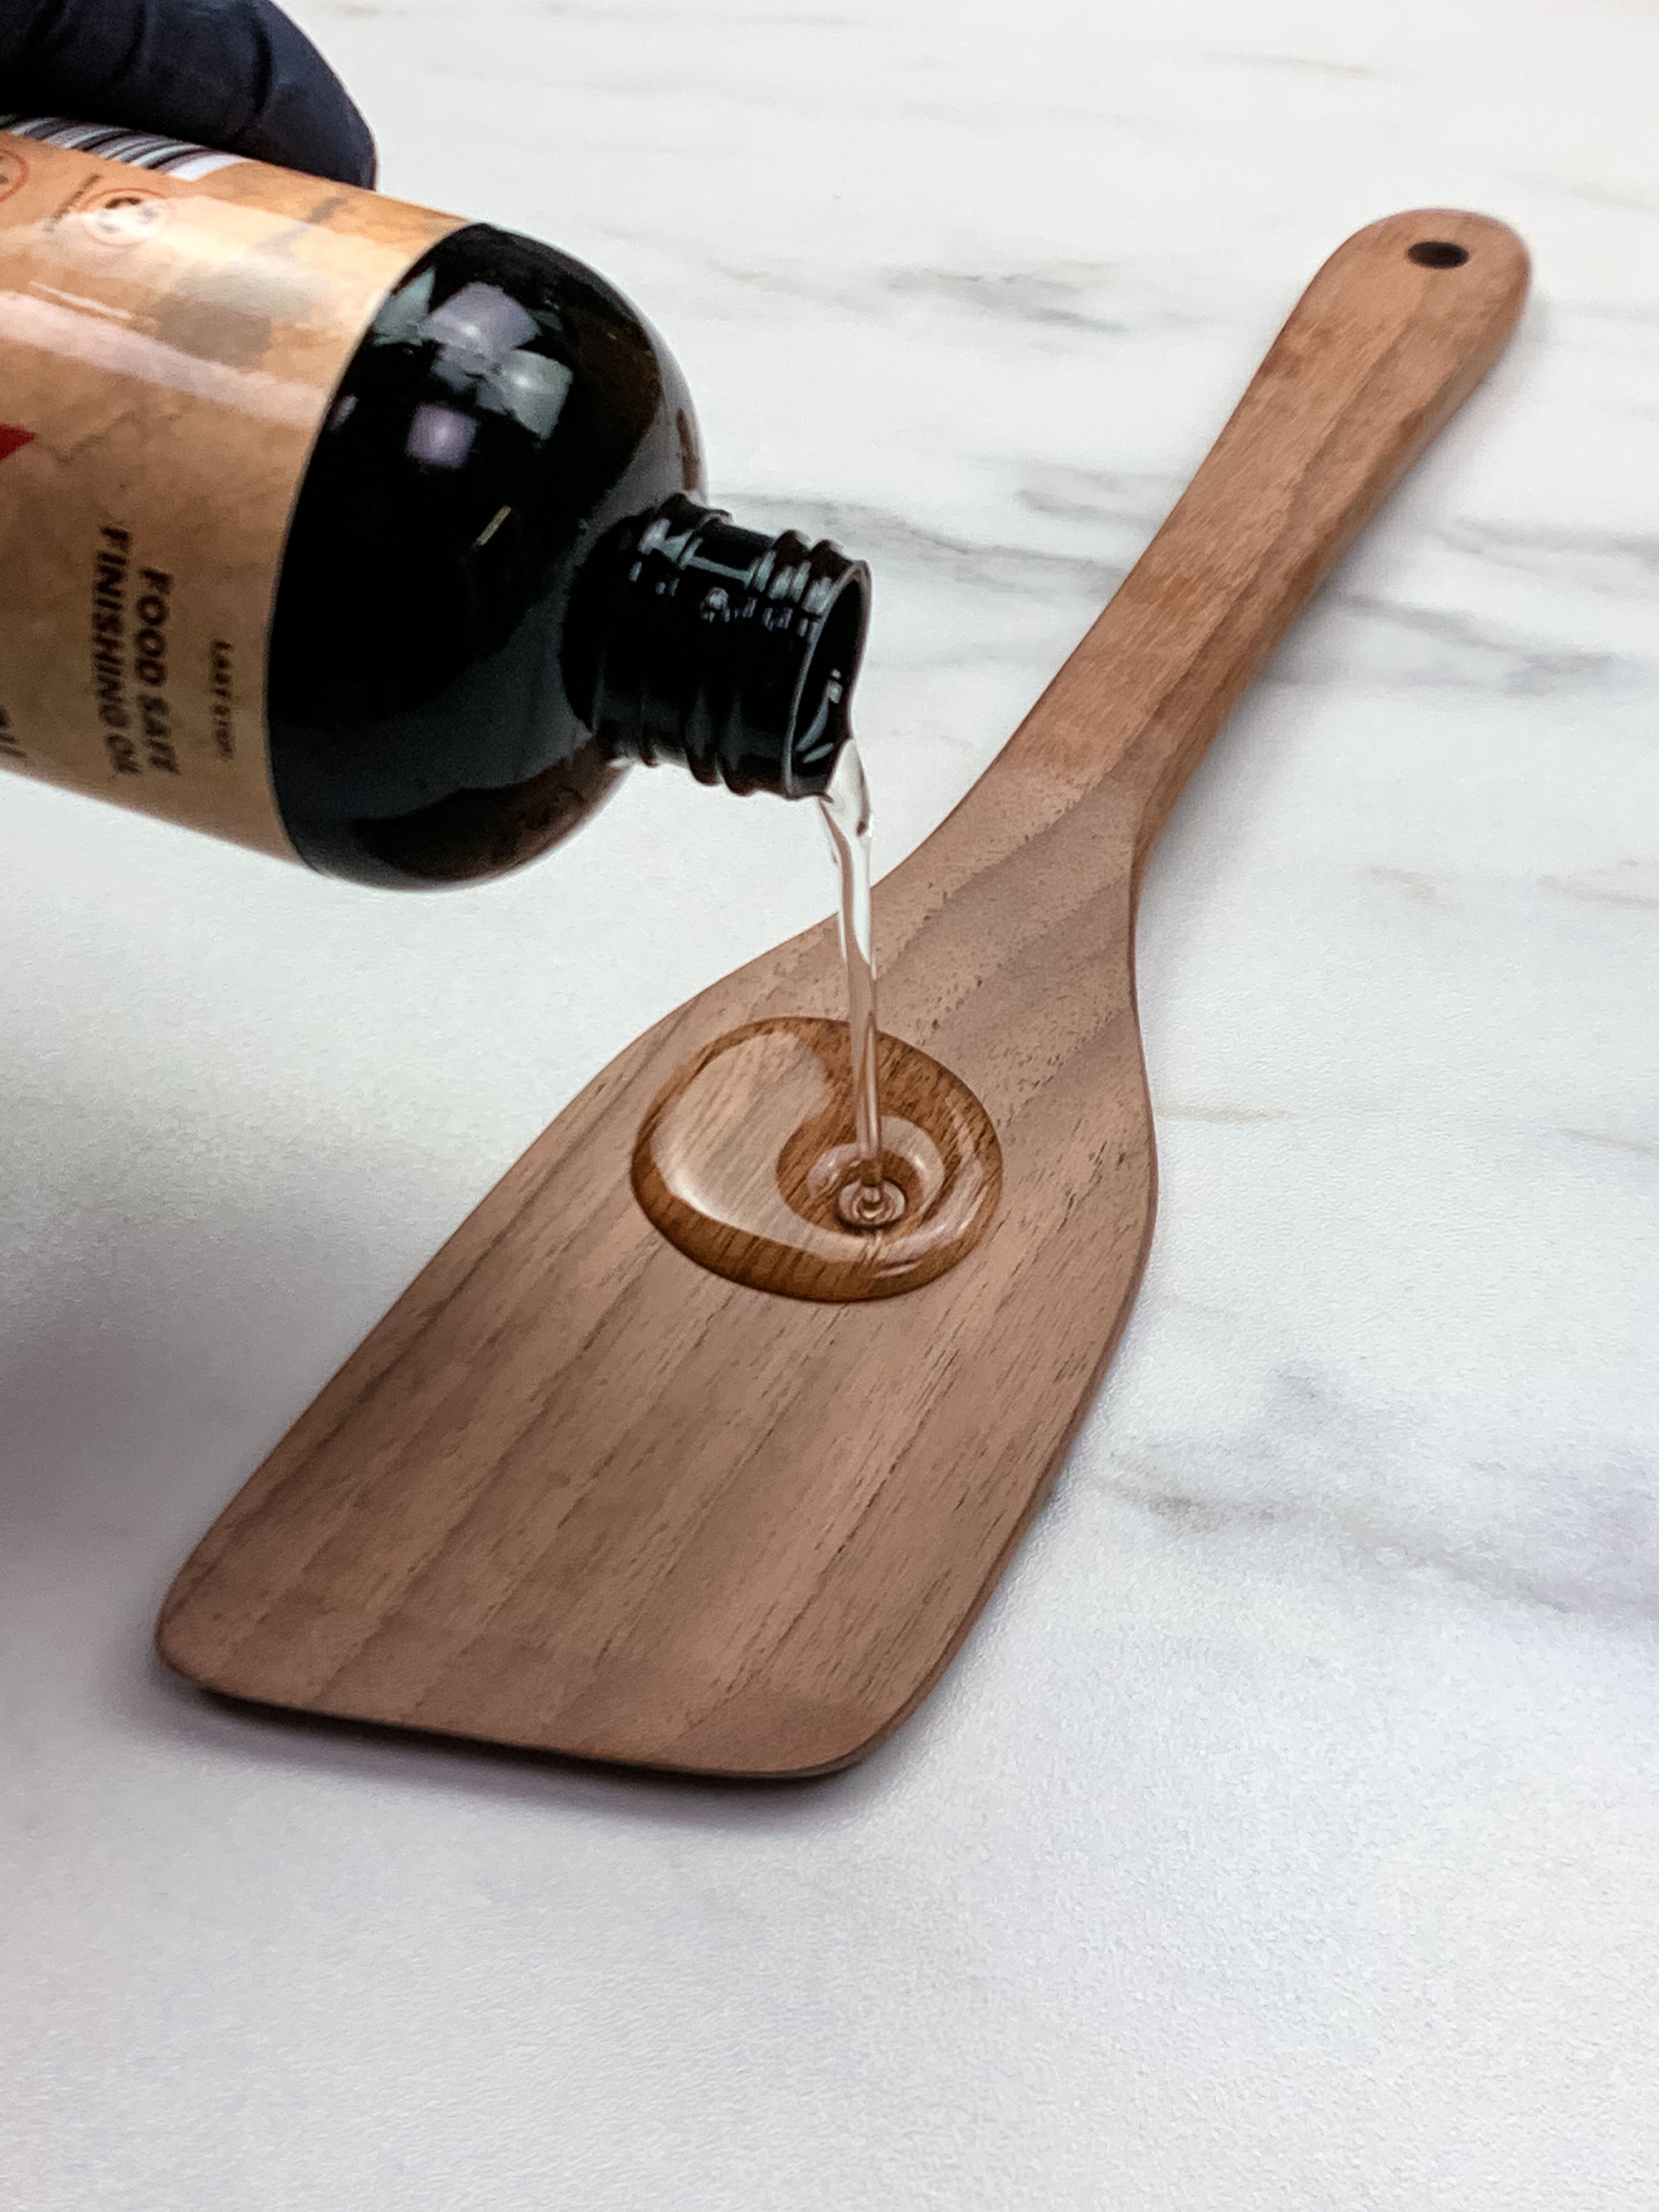 The Benefits of Using Wood Finishing Oil on Wood-Burned Crafts